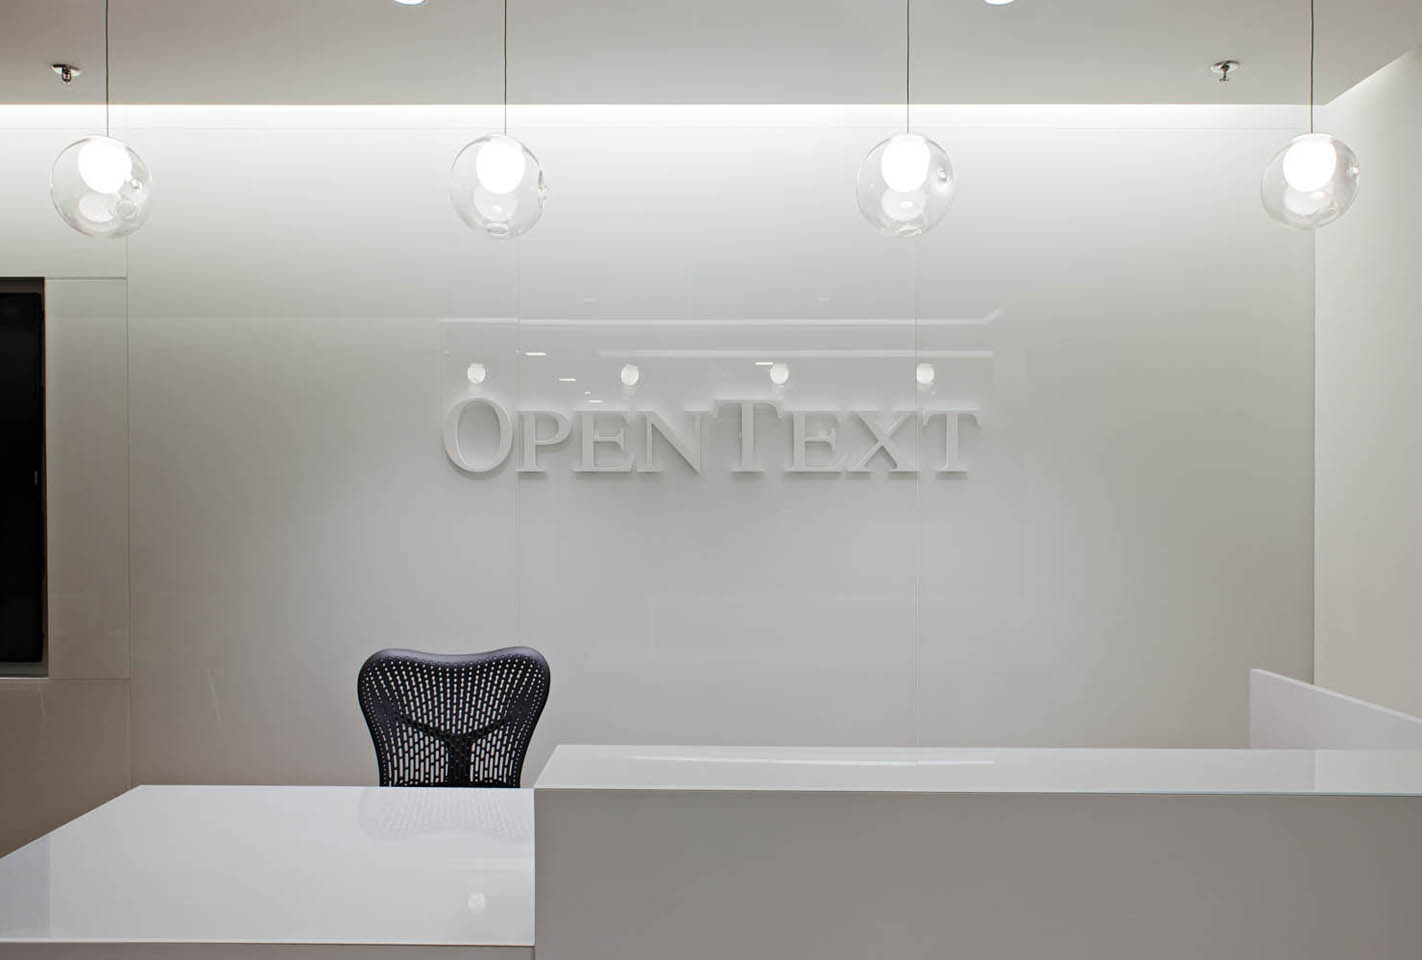 Open Text - Offices